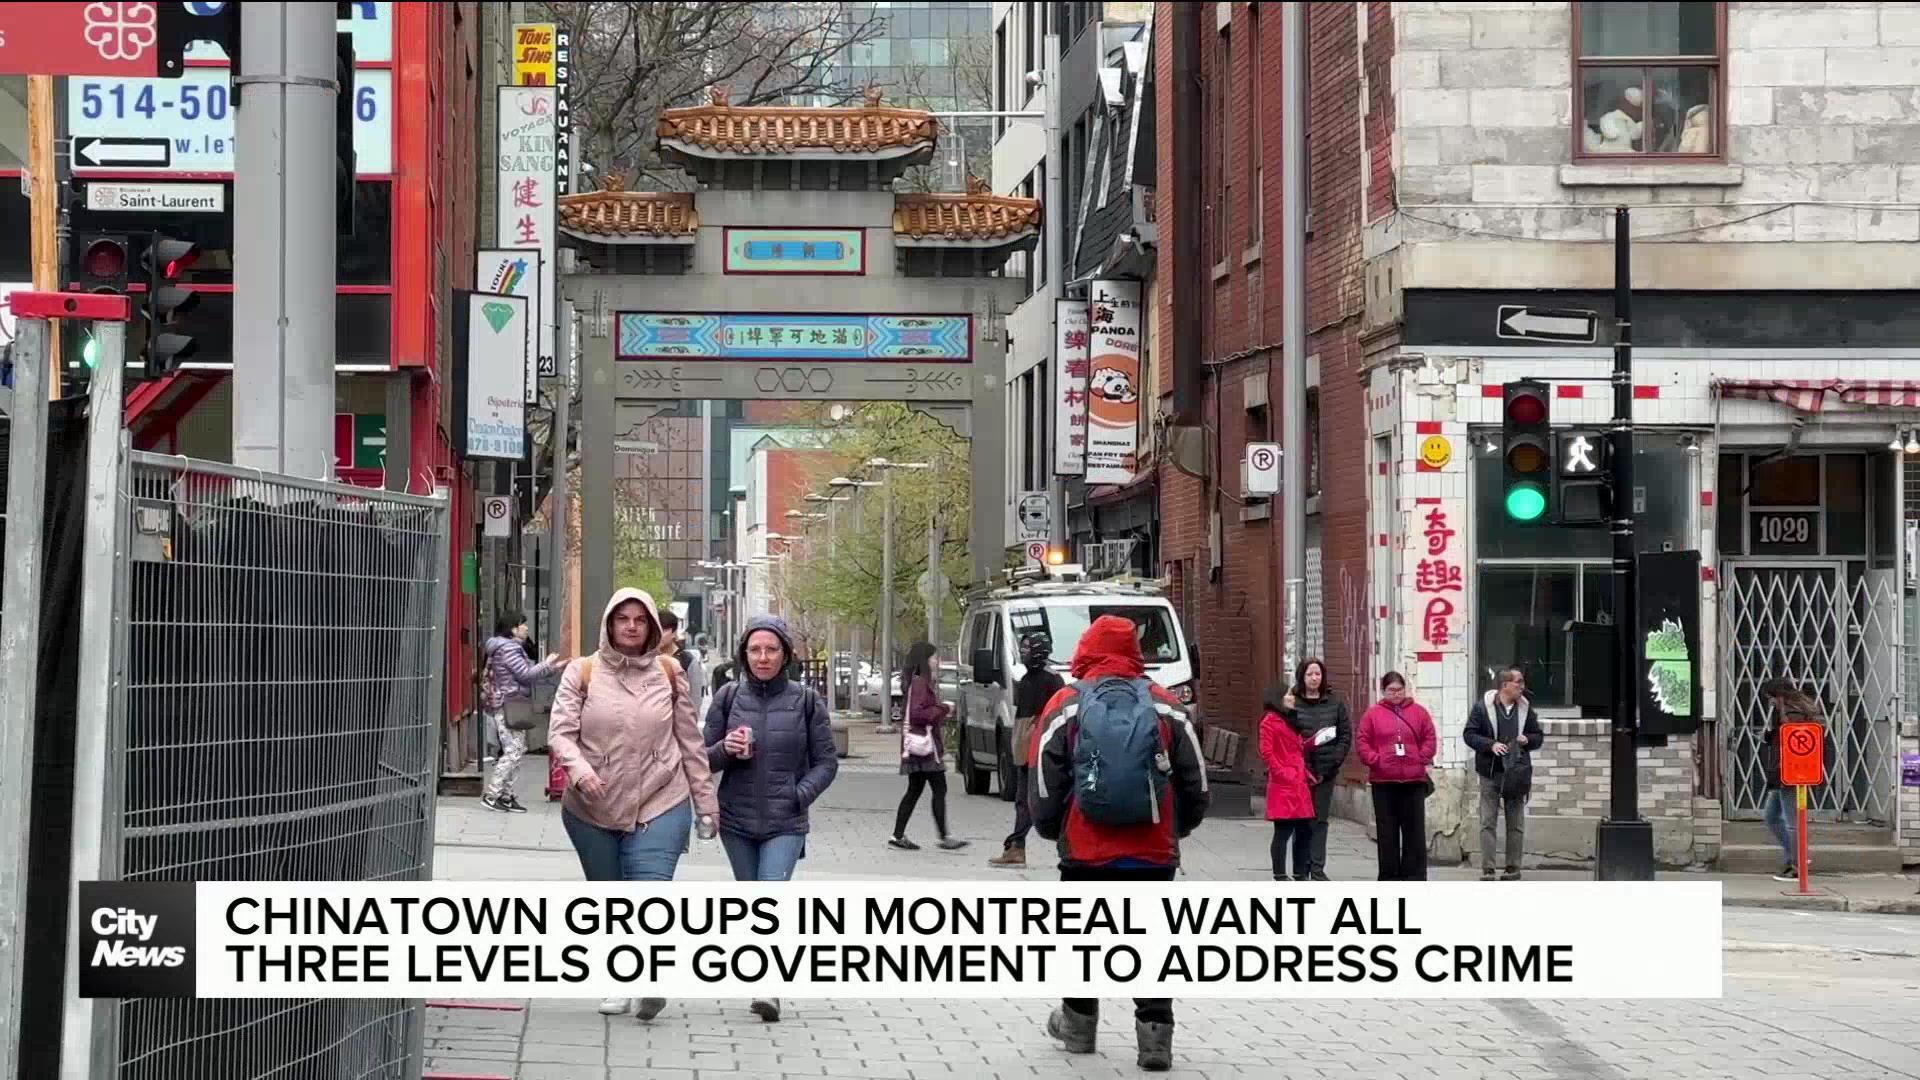 Groups in Montreal’s Chinatown want governments to address crime